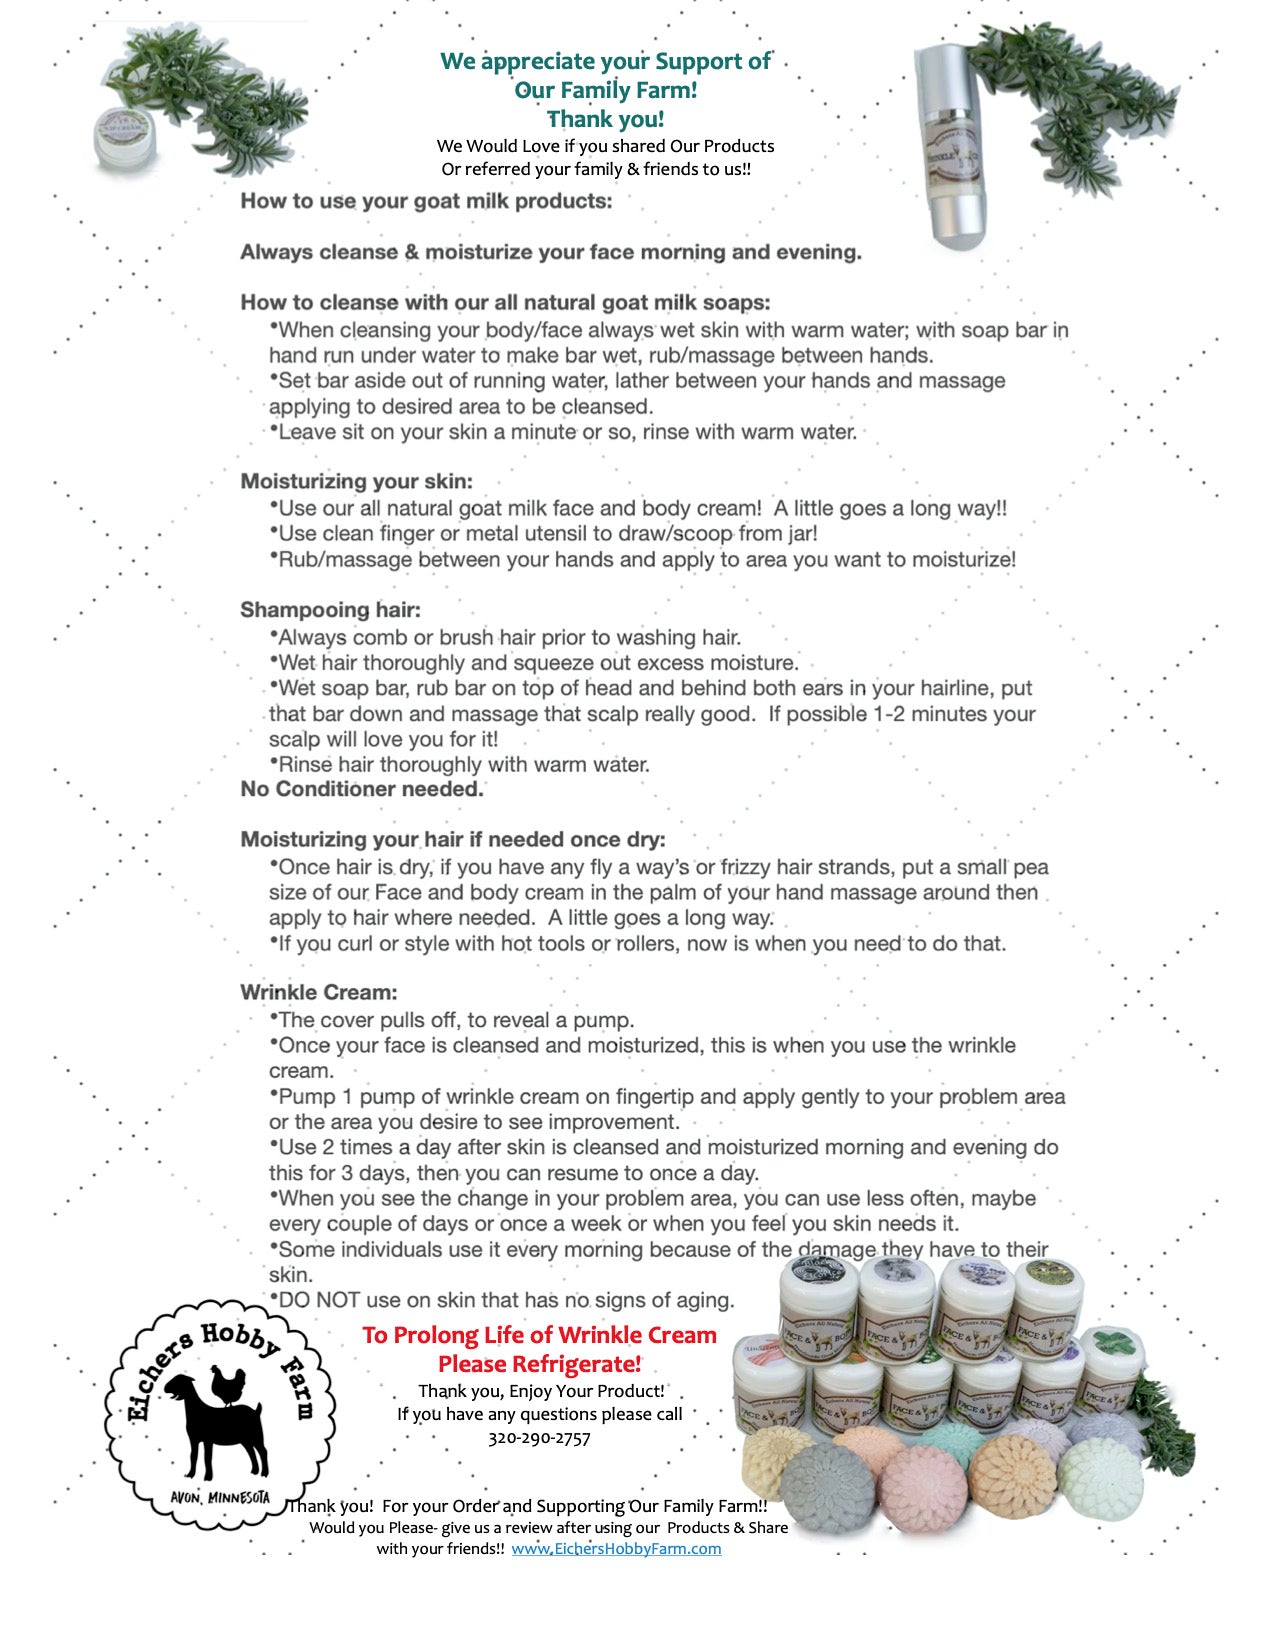 How to Use Eichers Hobby Farm All Natural Goat Milk Products